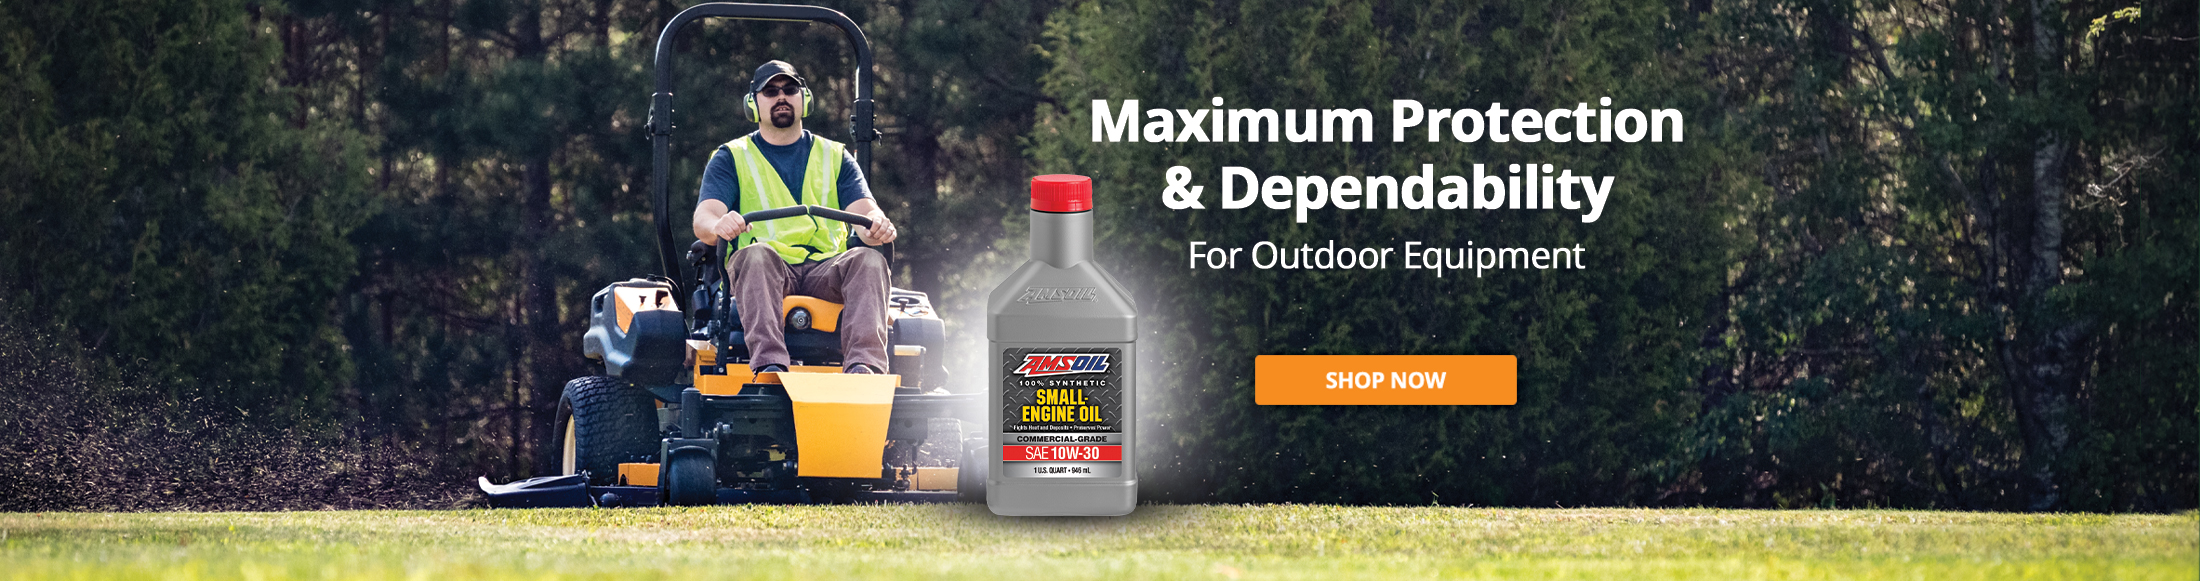 Maximum Protection and Dependability for Outdoor Equipment